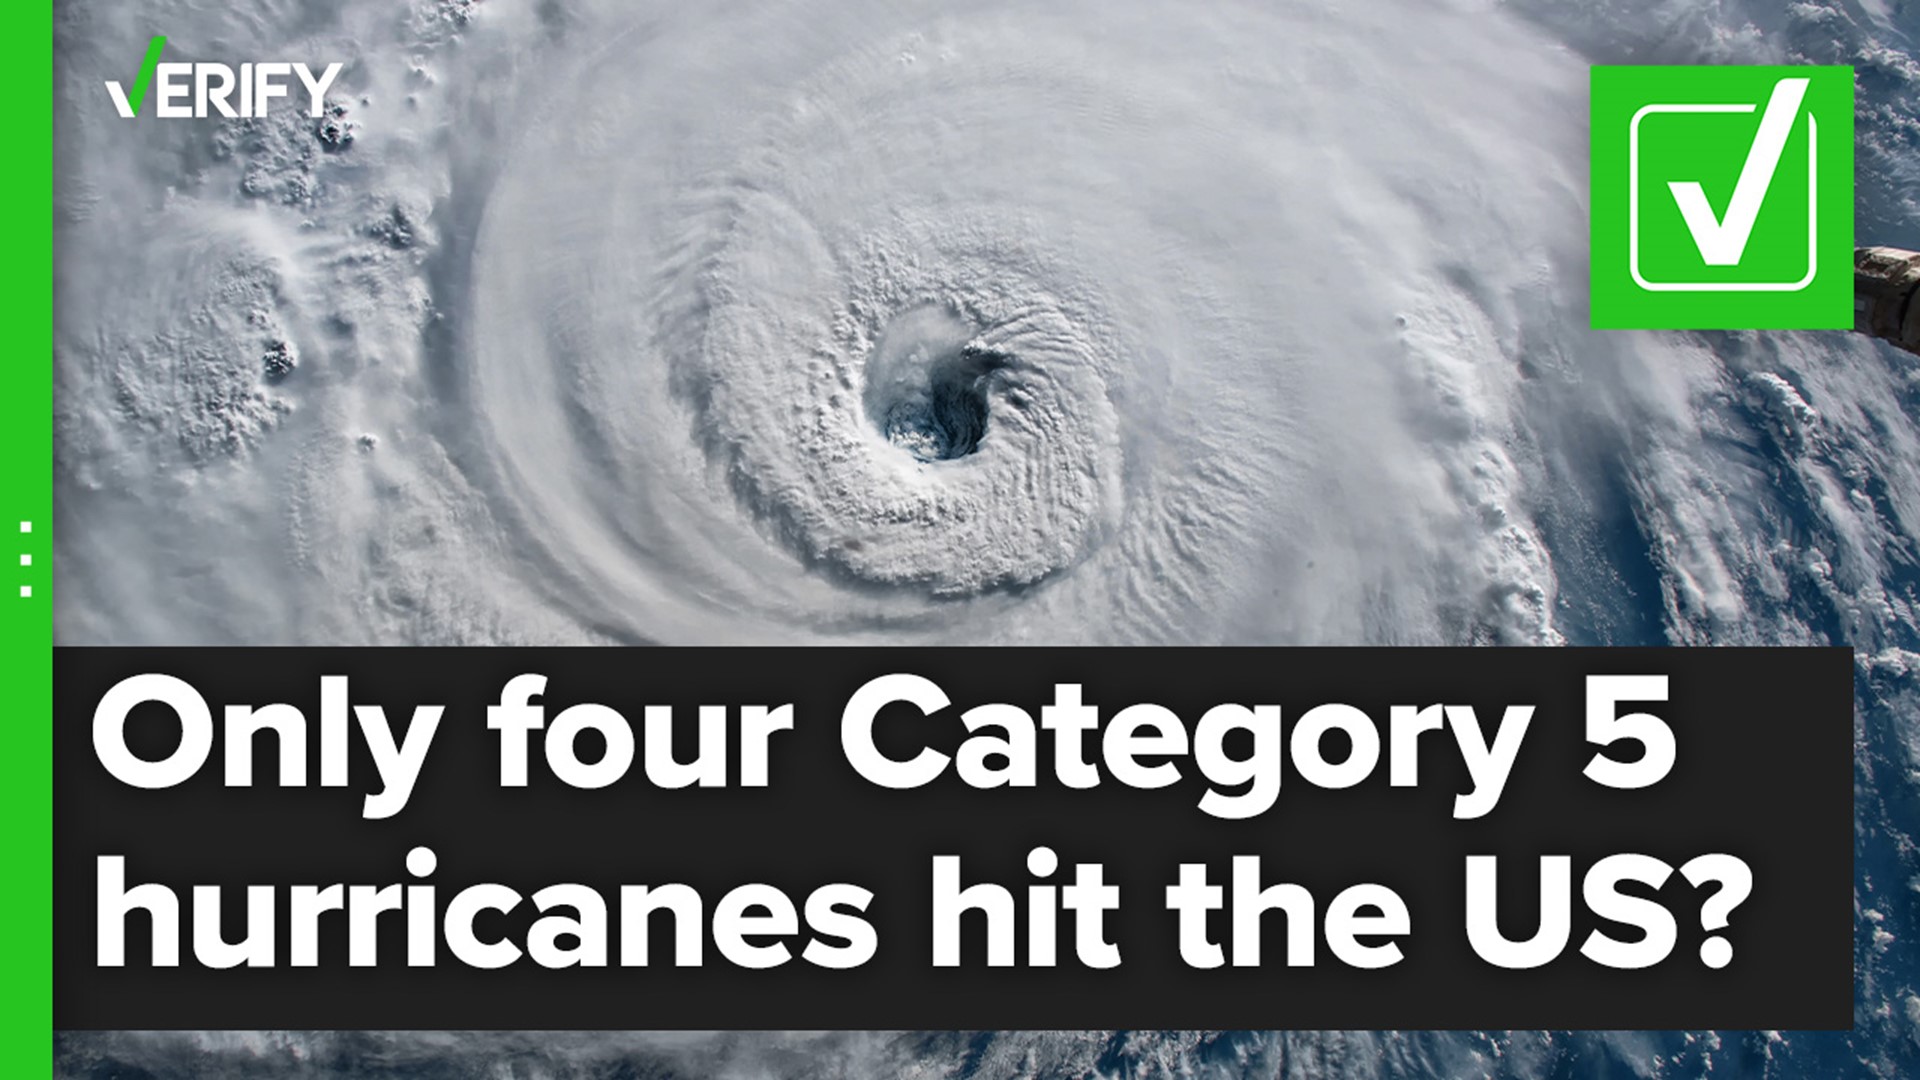 Only four hurricanes were at Category 5 strength when they made landfall in the mainland U.S. Ian and Katrina aren’t on the list.